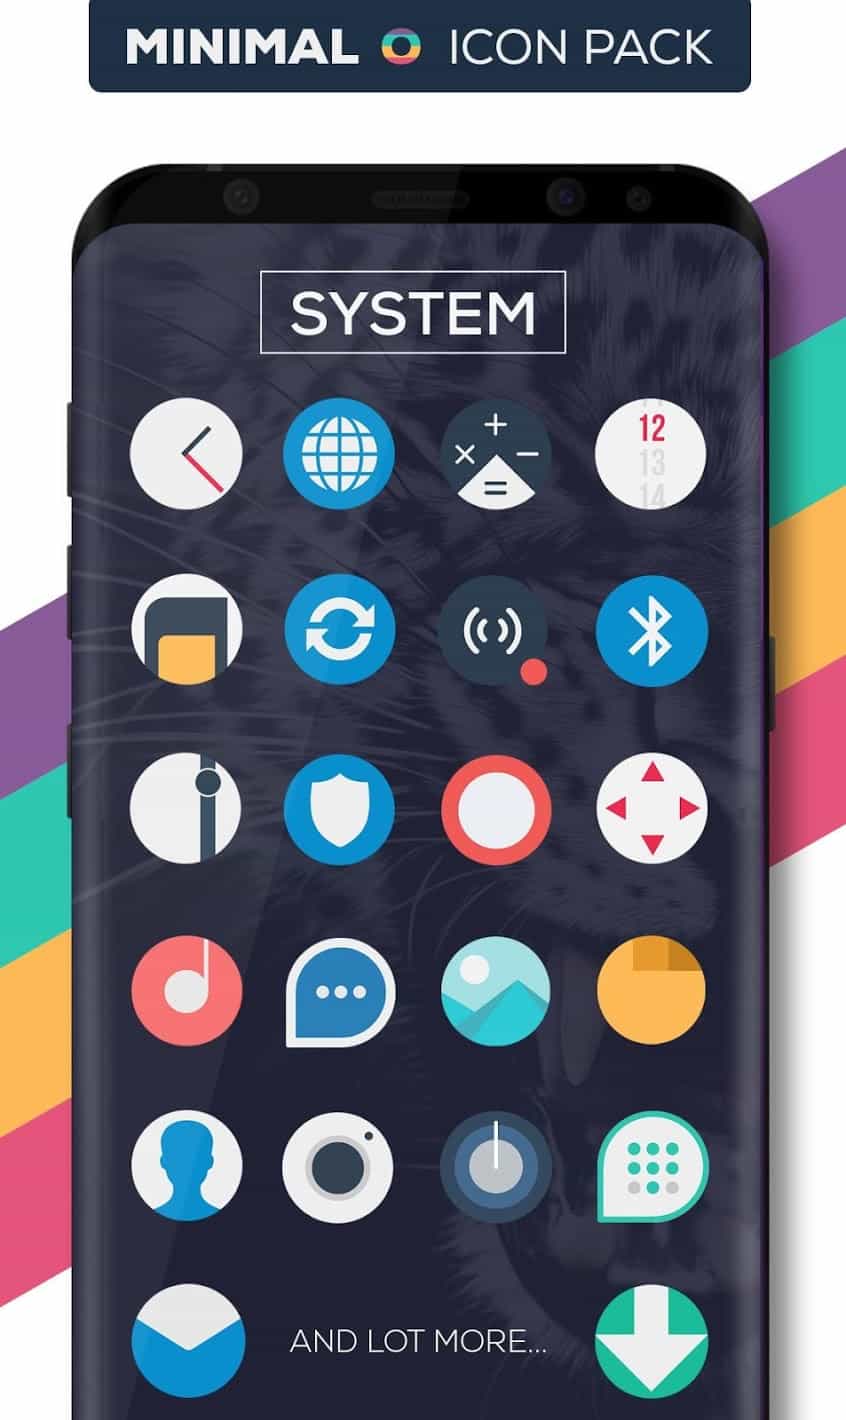 Minimal O Icon Pack Patched APK